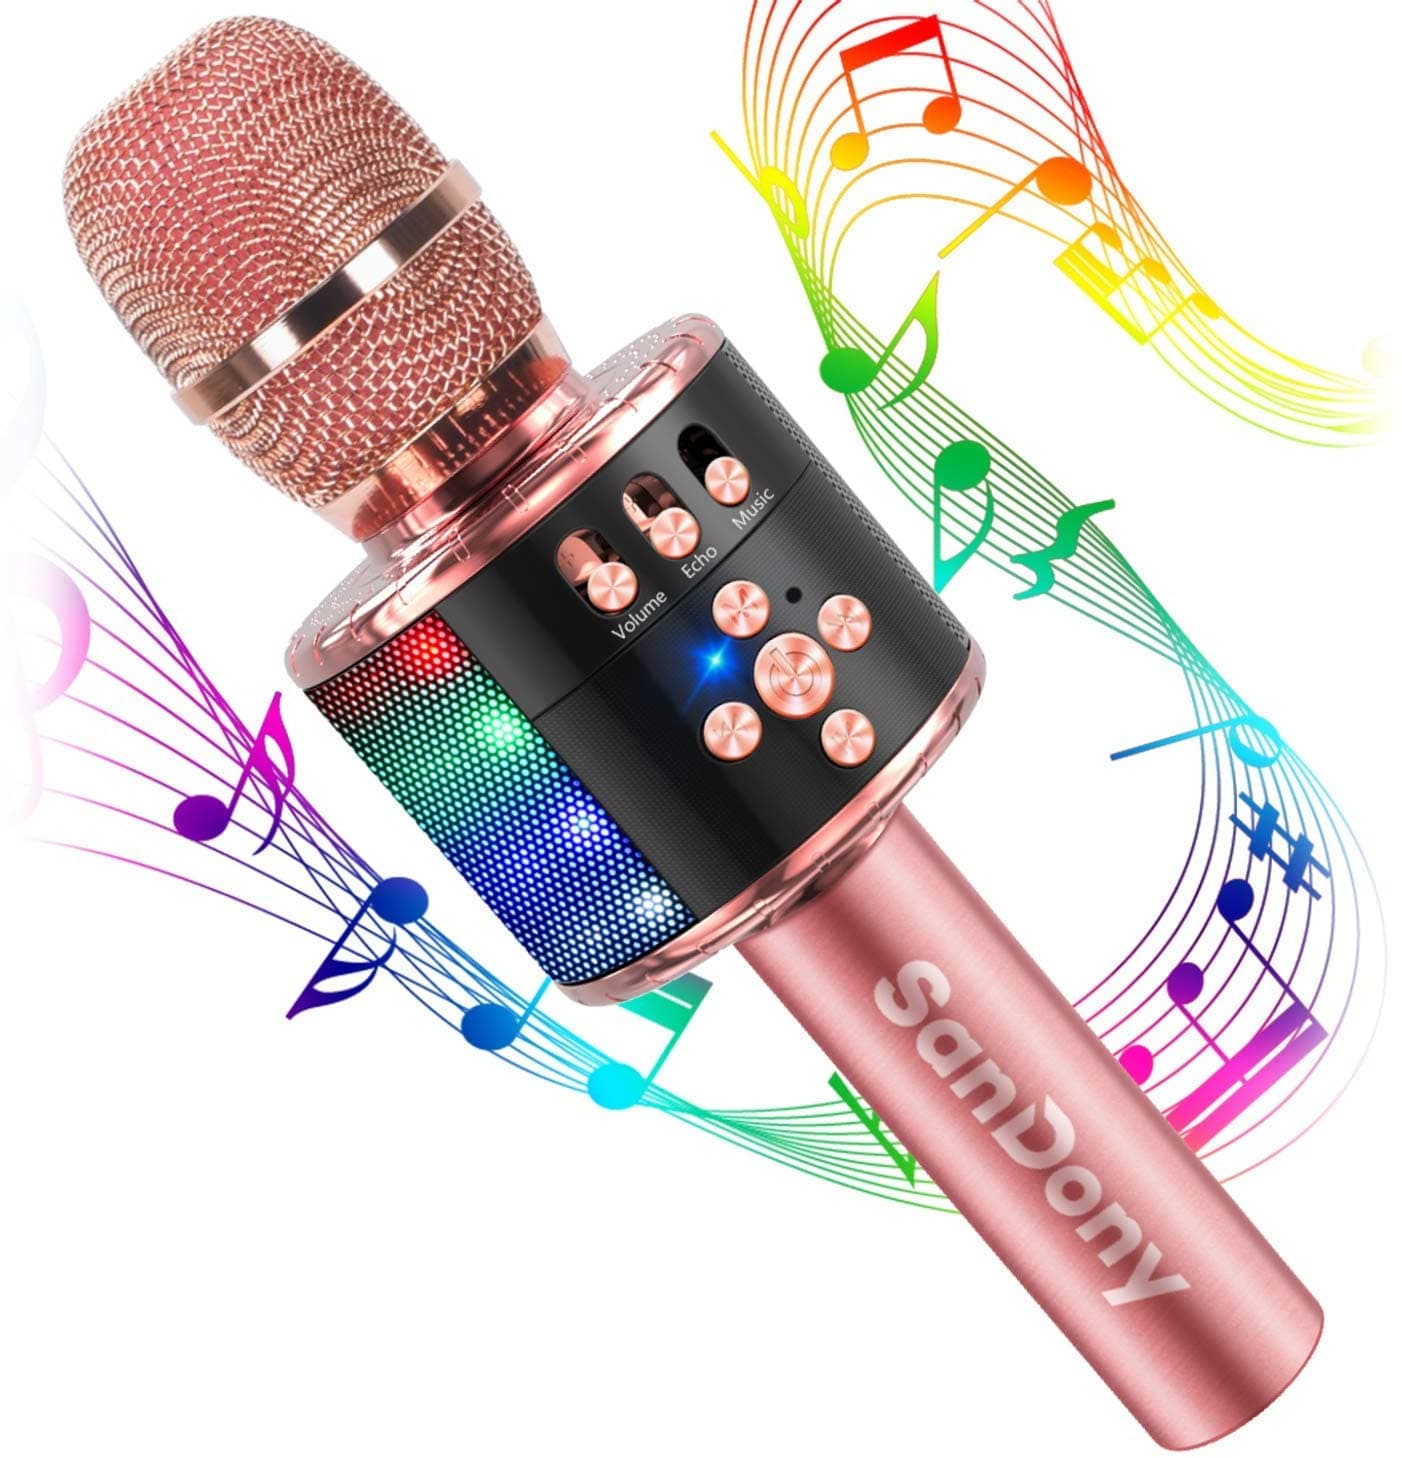 New]2019 new publication It supports large-capacity 2800mAh TF card  function recording possibility Android&iPhone with the karaoke microphone  bluetooth portable speaker wireless microphone karaoke machine music  reproduction noise canceling LED light ...